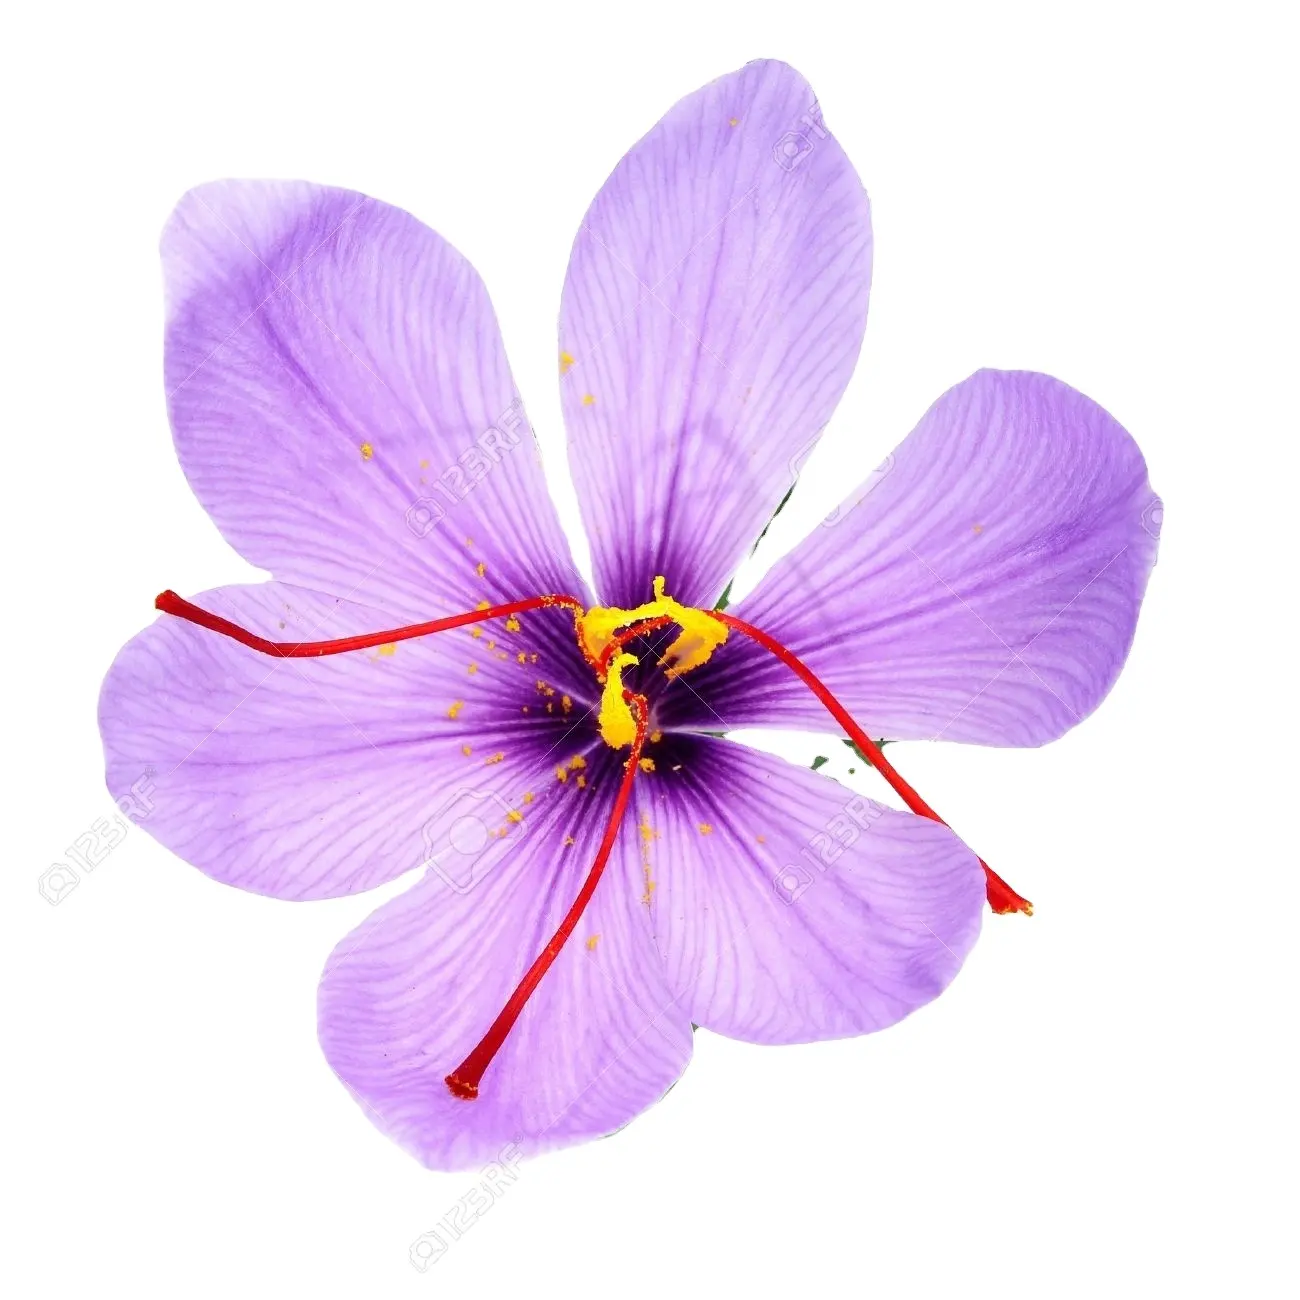 Finest Quality Mogra Saffron Full Cut Size At Best Price And With Certificate From Kashmir India